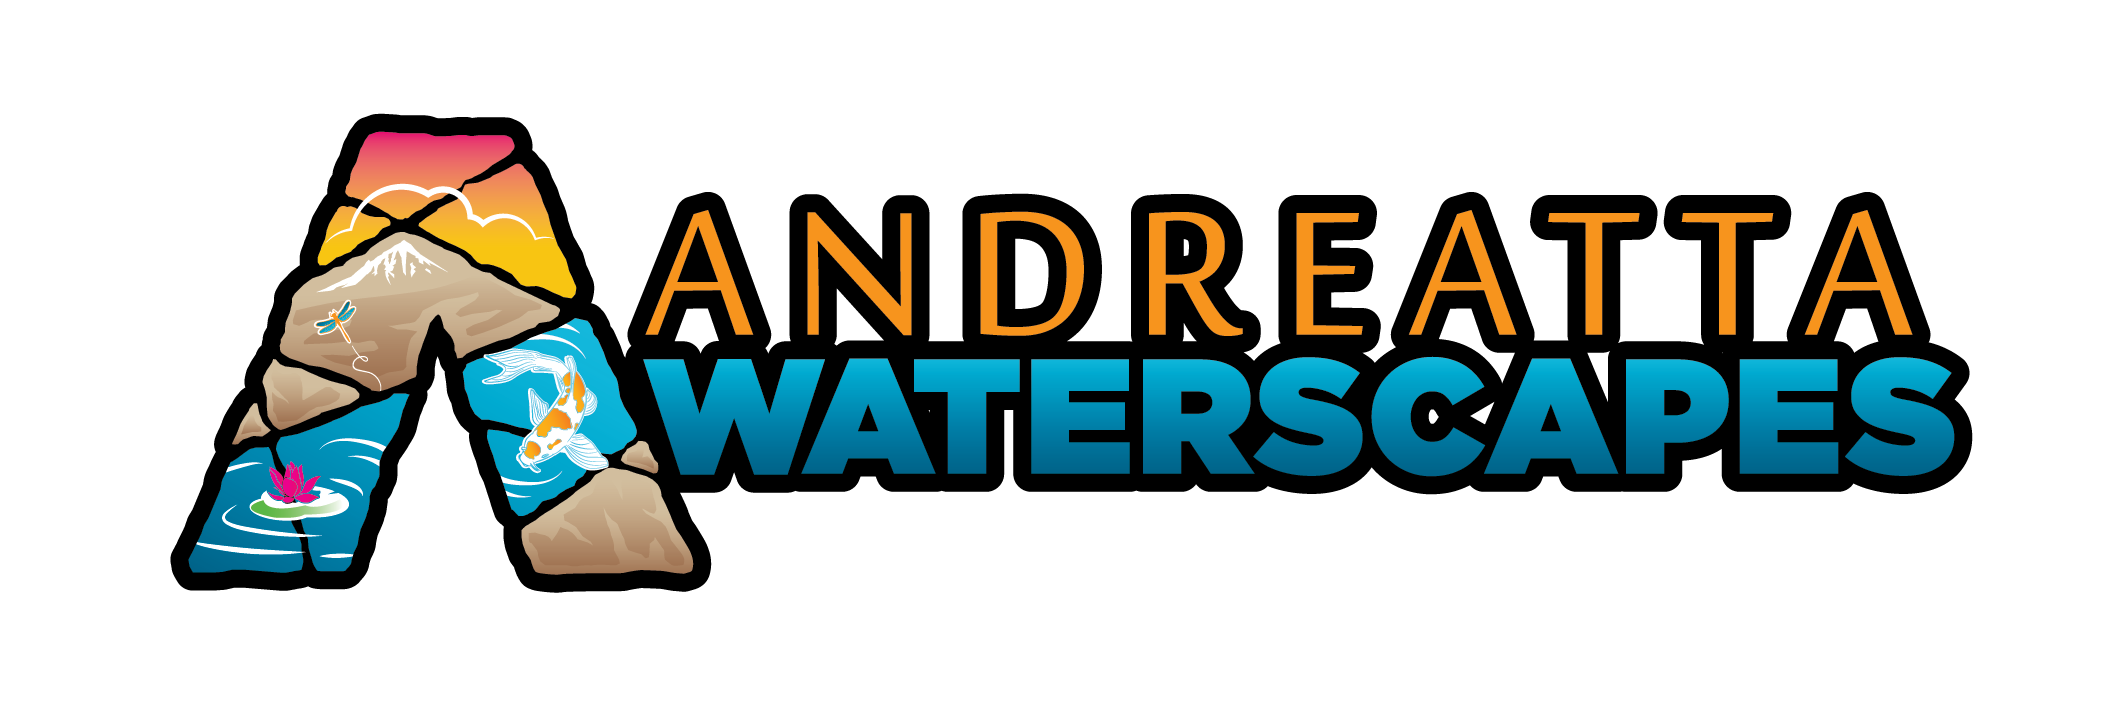 Andreatta Waterscapes Logo